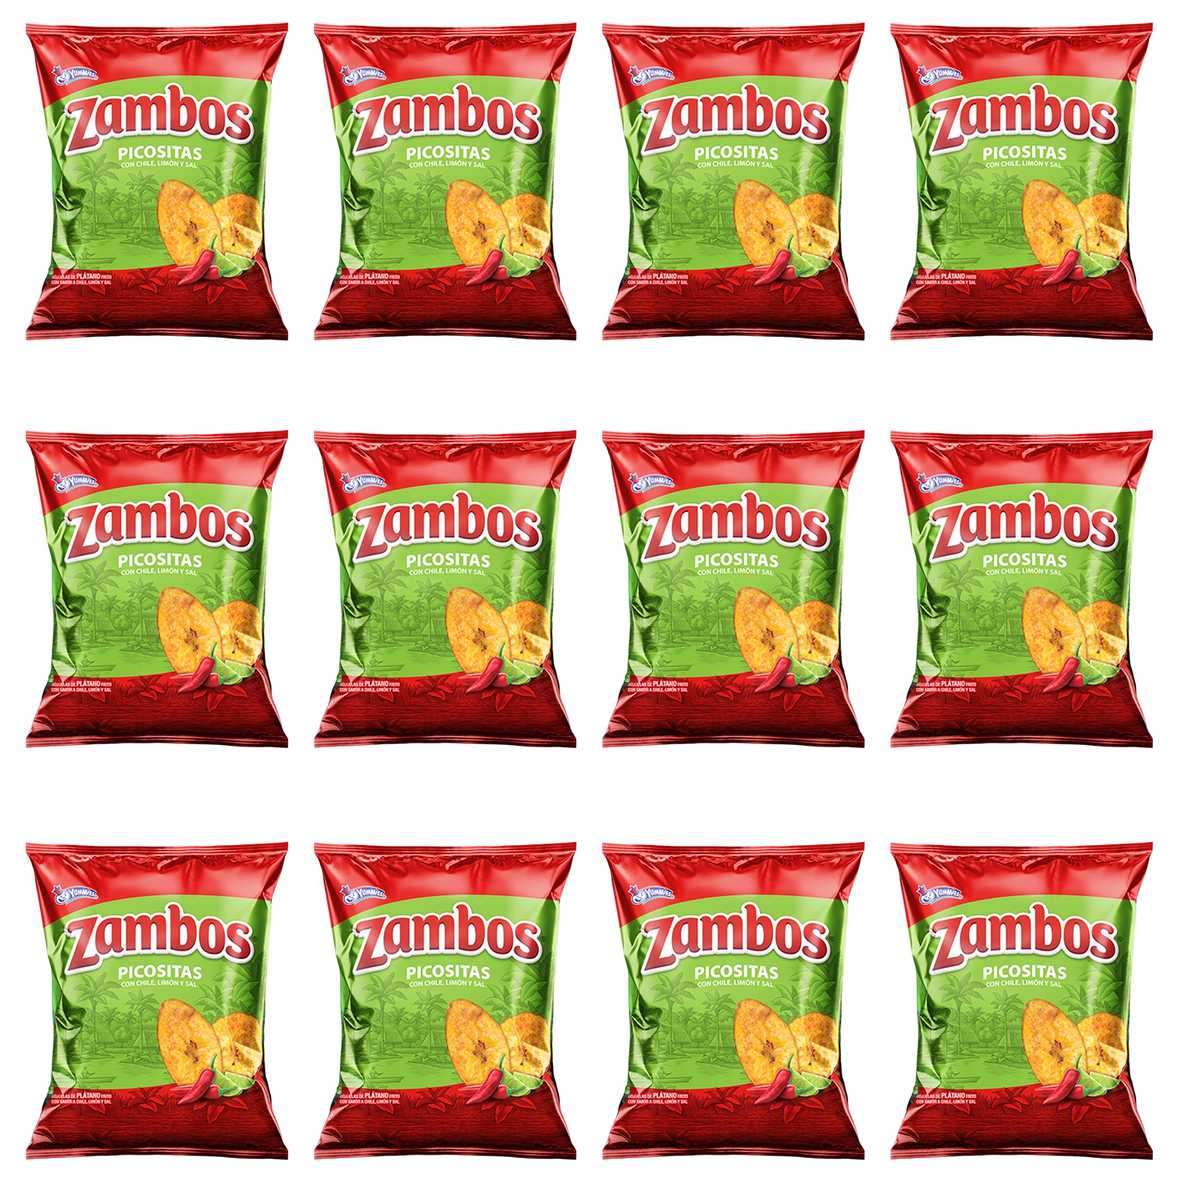 12 Bags of Zambos plantain chips with chili, lime and salt